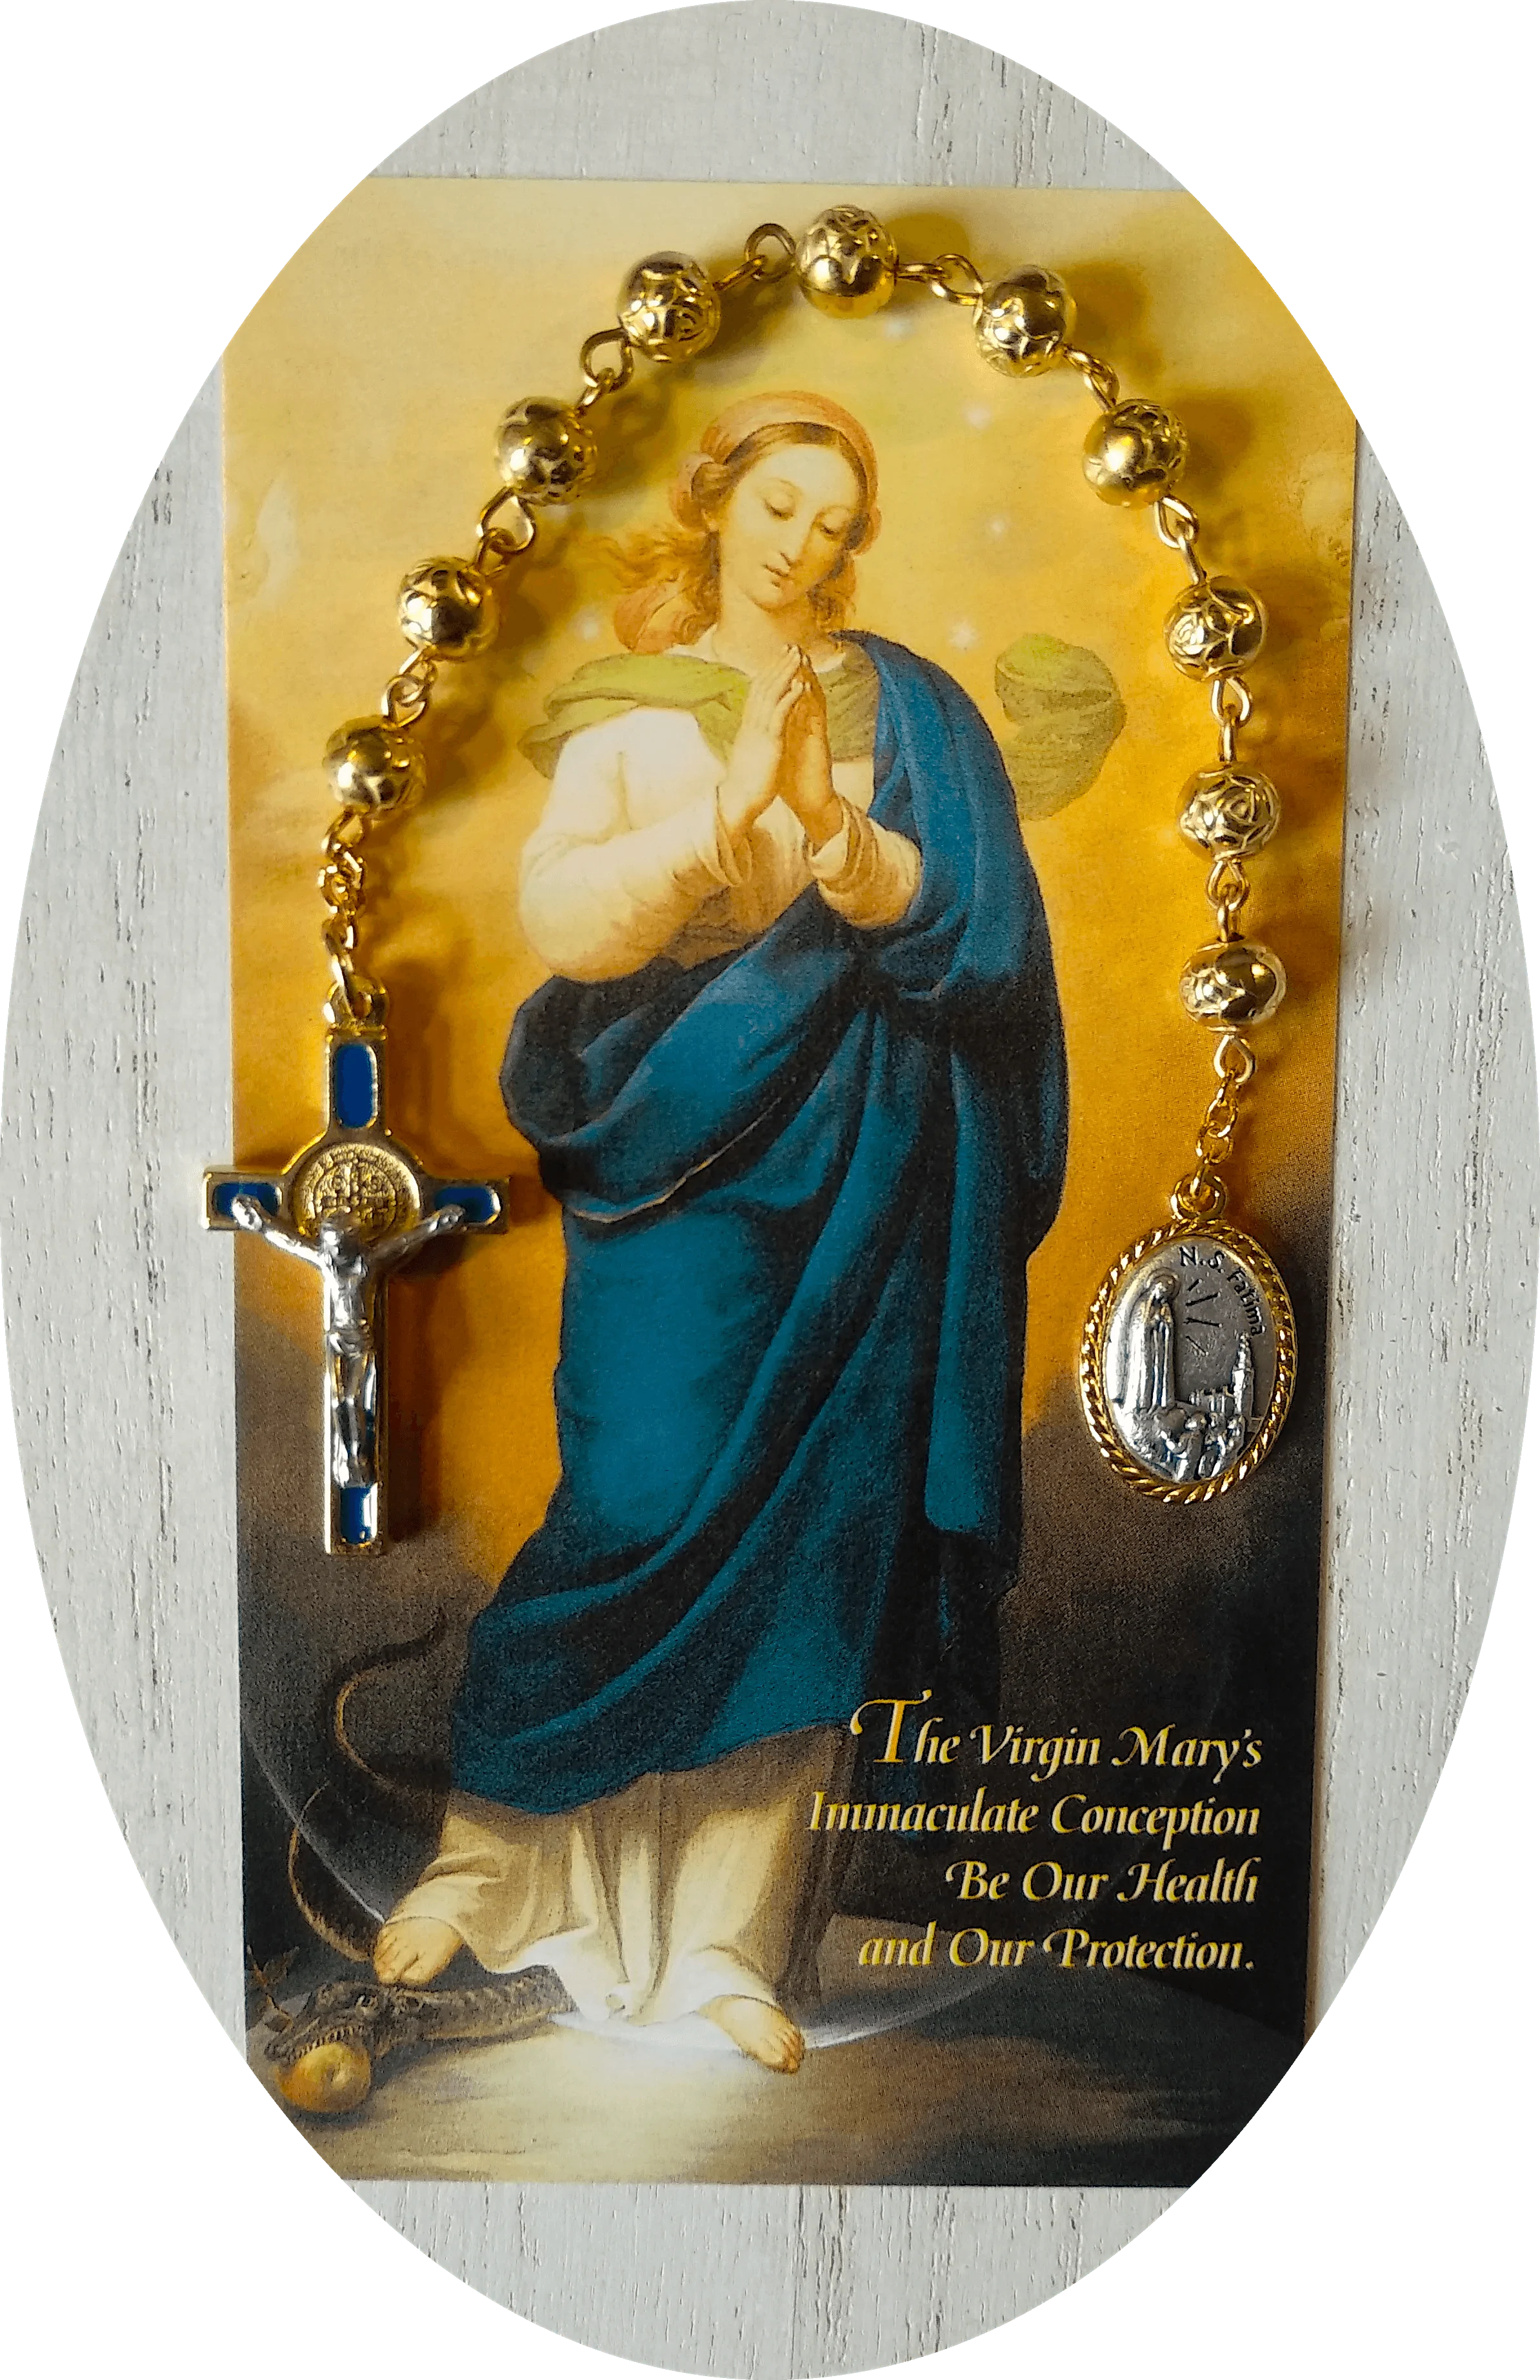 Big Blue Miraculous Medal Blessed by Pope Francis - BVM - Virgin Mary